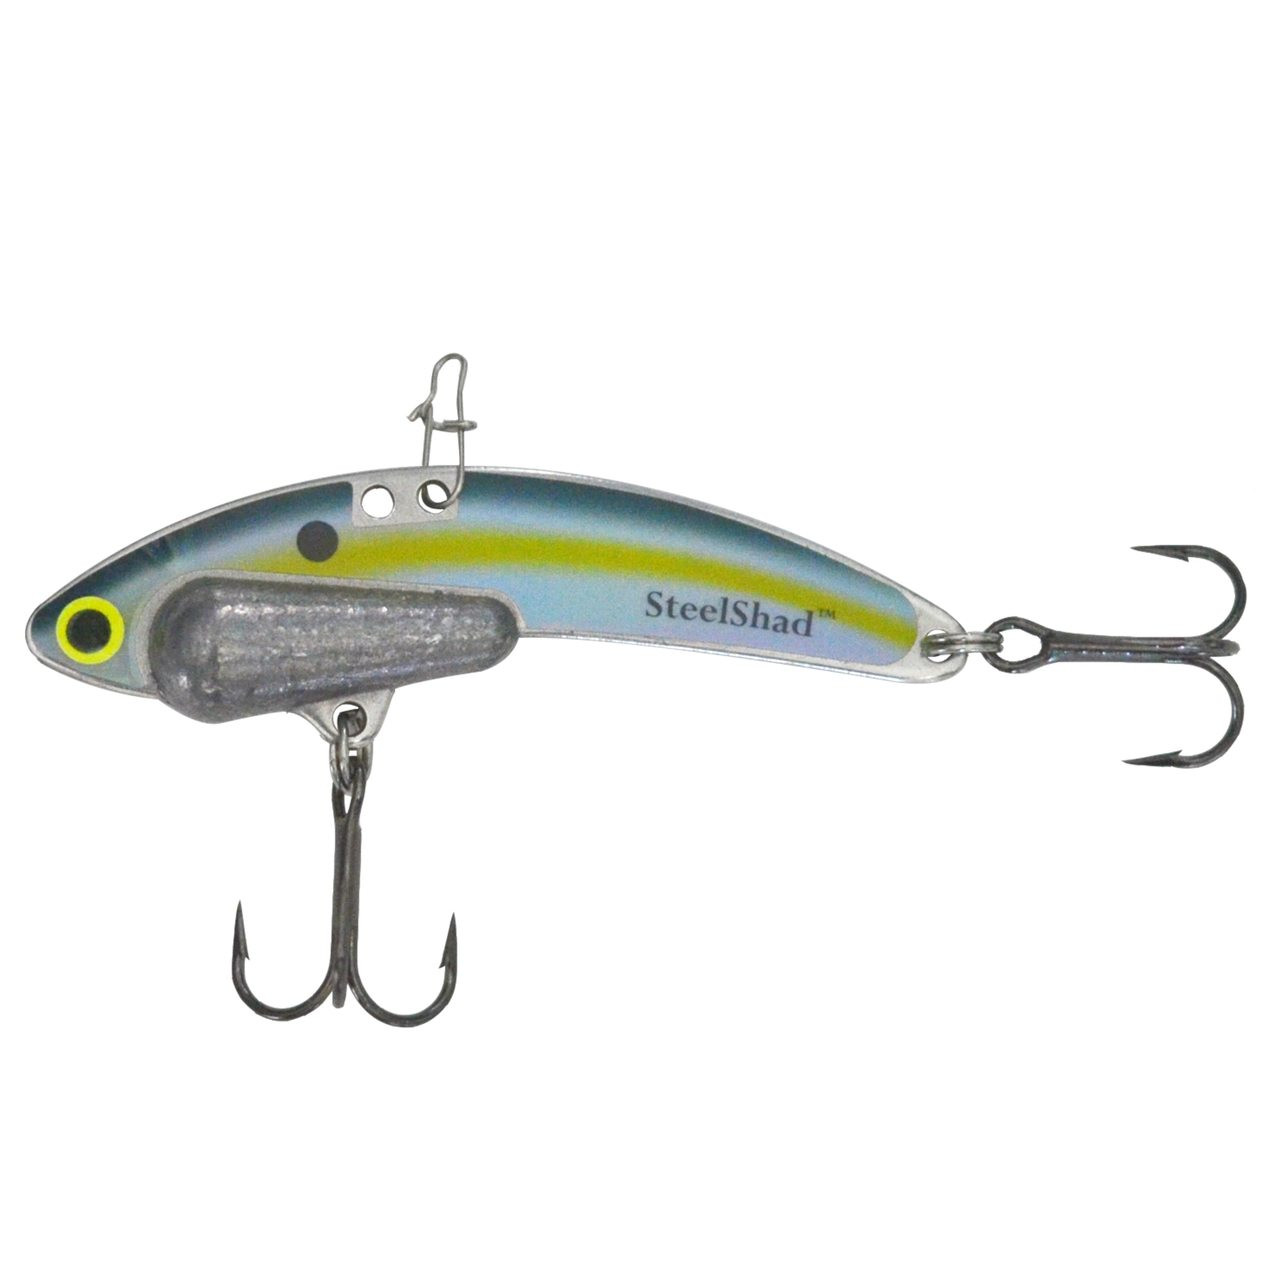 Sexy Shad Heavy Series - 1/2 oz., #8 VMC Black Nickle Hooks, and Line Clip